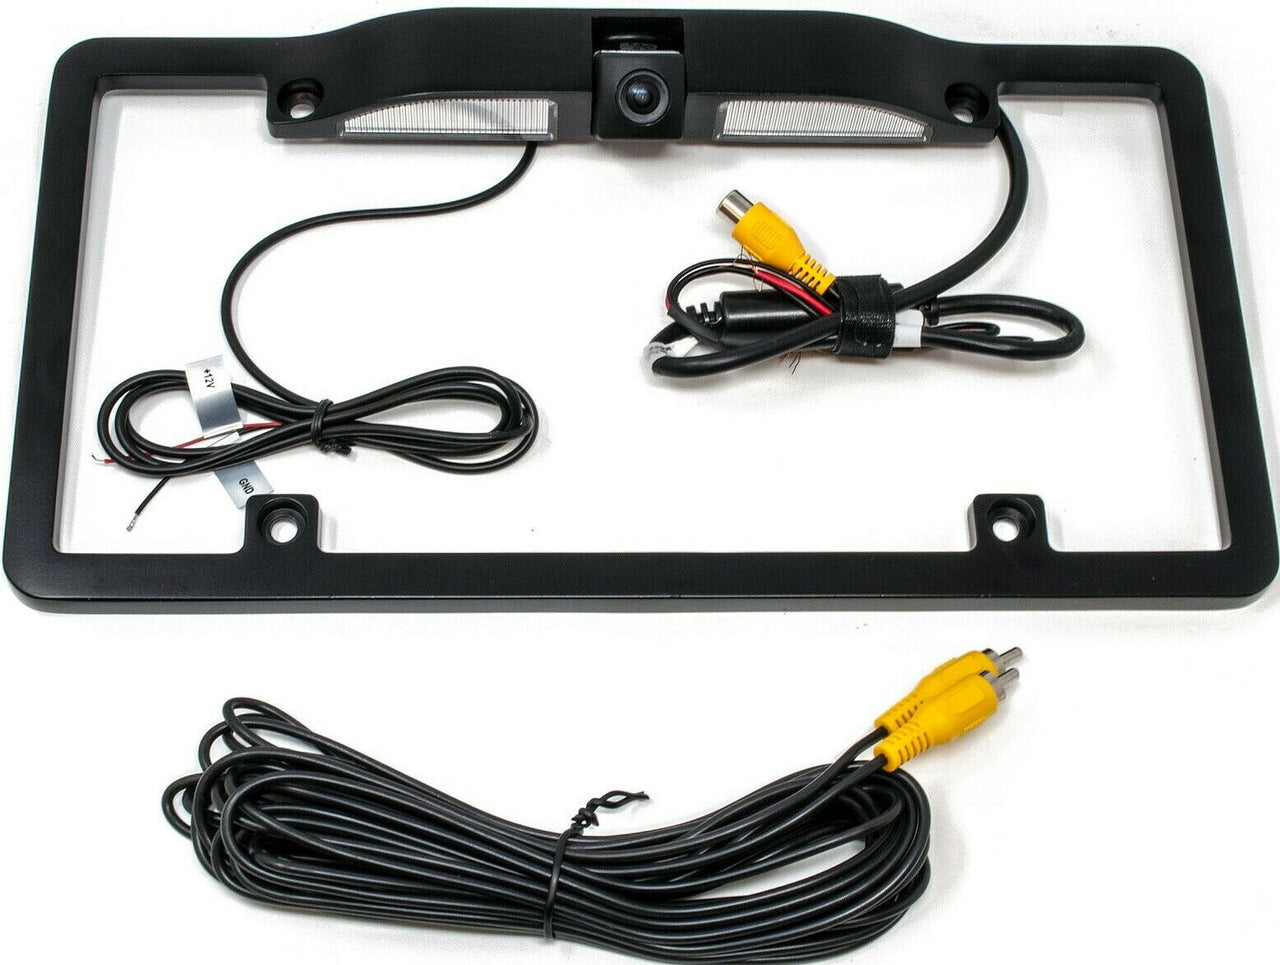 Alpine KTX-C10LP + HCE-C1100 License Plate Mounting Kit & Rear-View Camera